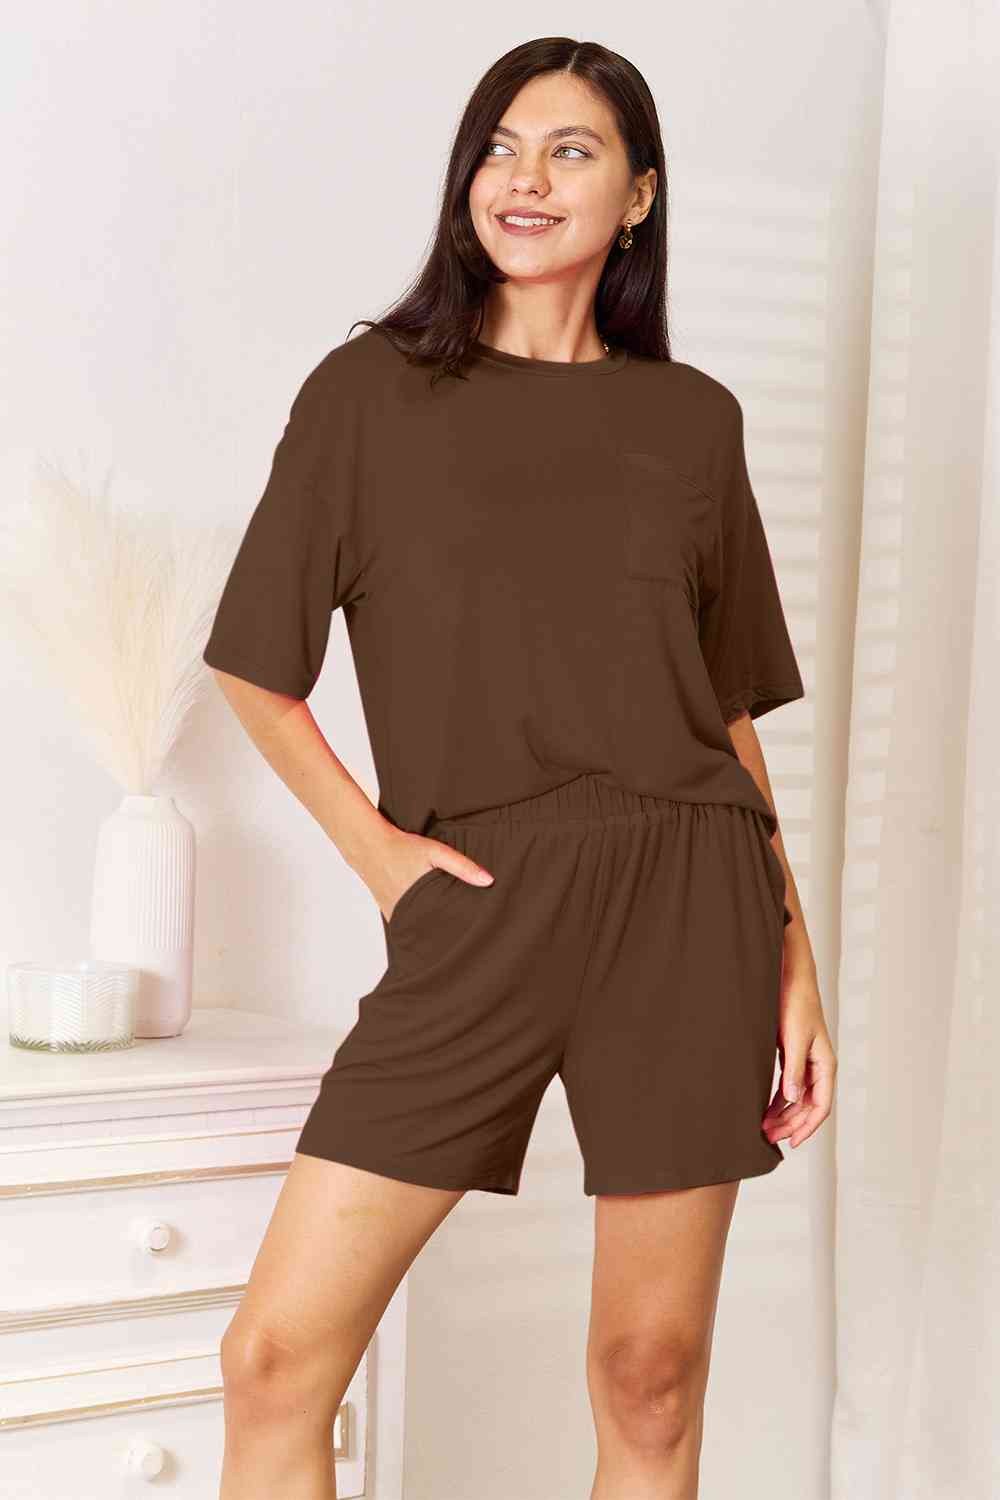 Soft Rayon Half Sleeve Top and Shorts Set - Camis & Tops - Outfit Sets - 9 - 2024